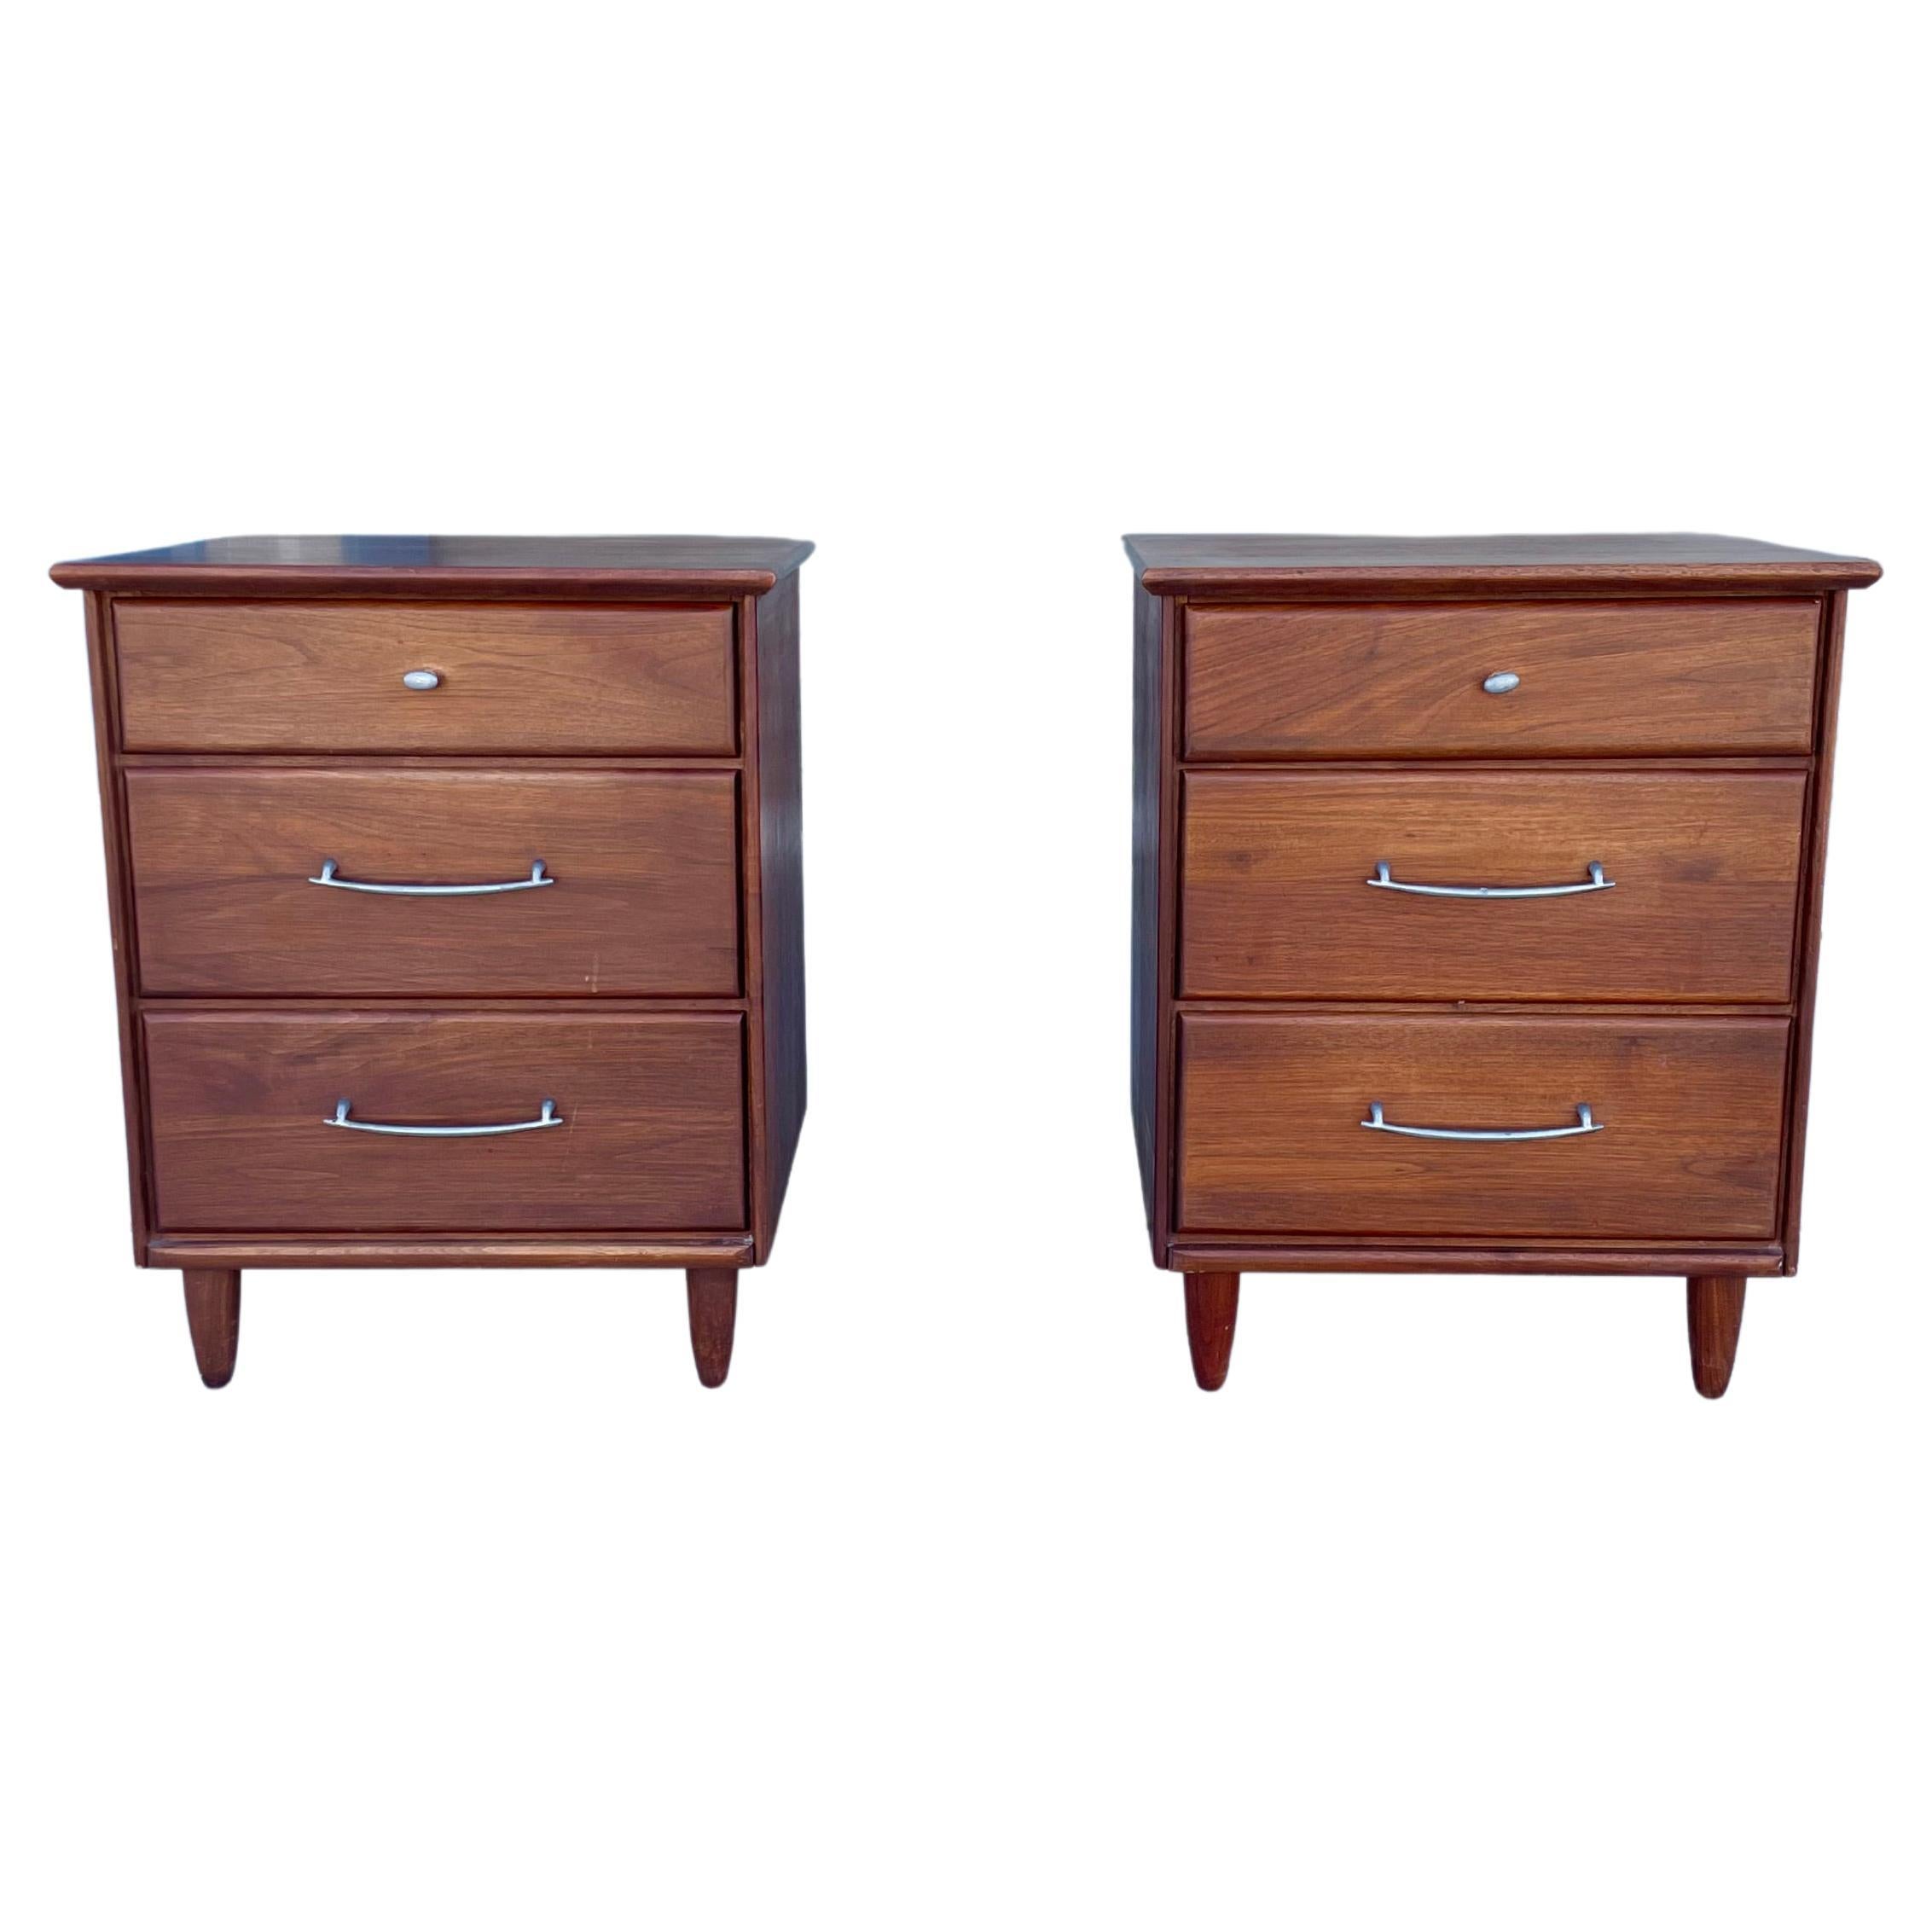 1960s Mid Century Walnut Nightstands by Ace- Hi - a Pair For Sale